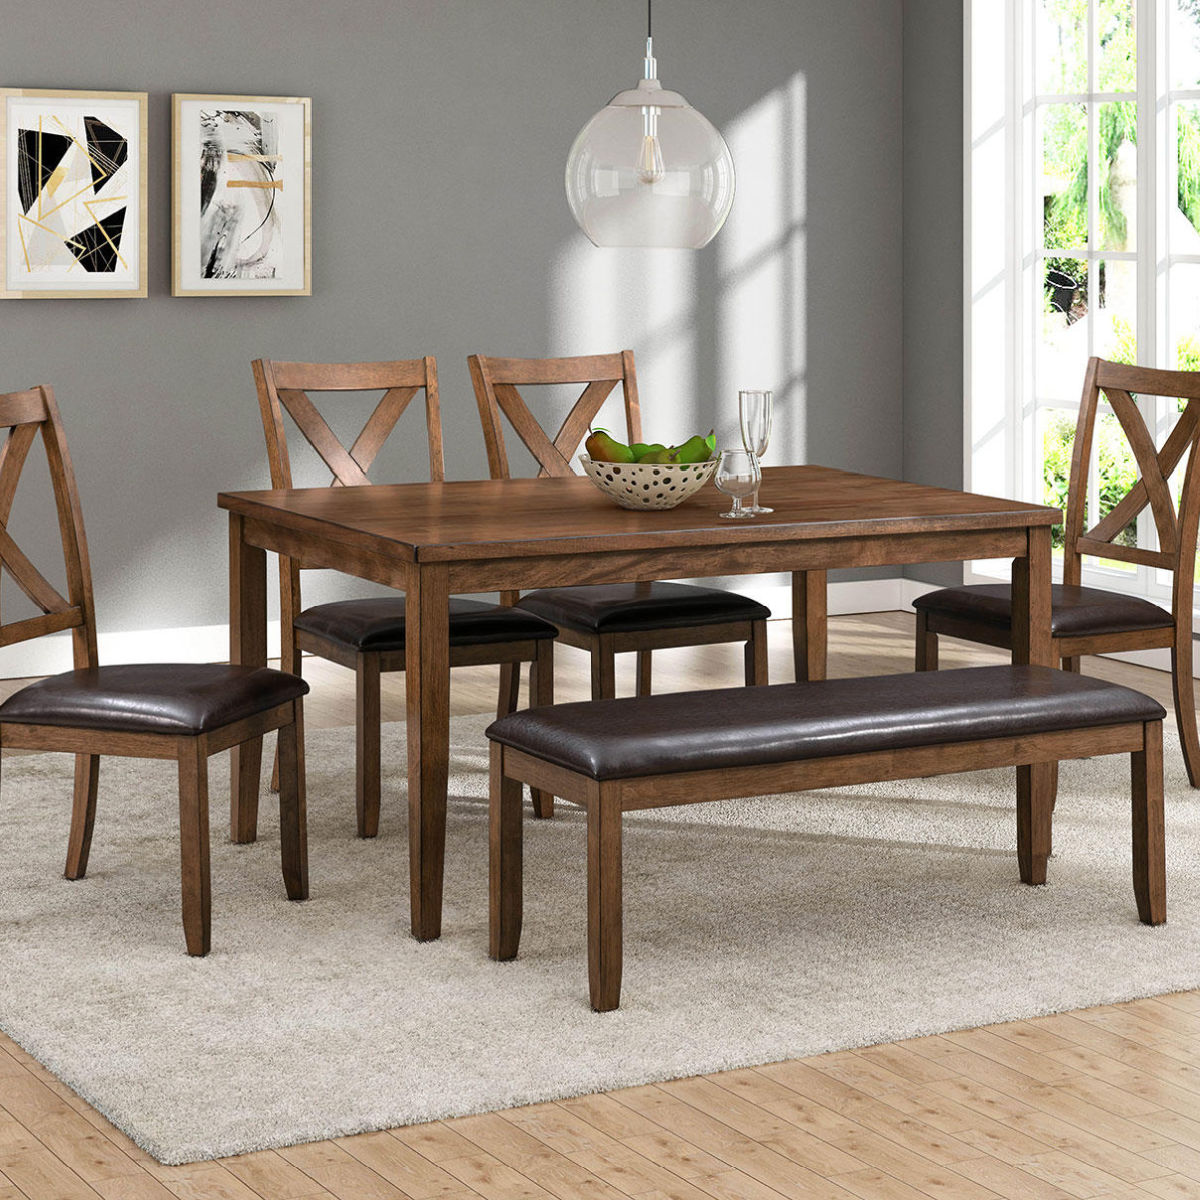 Abbyson Living Reese 6-Piece Wood Dining Set